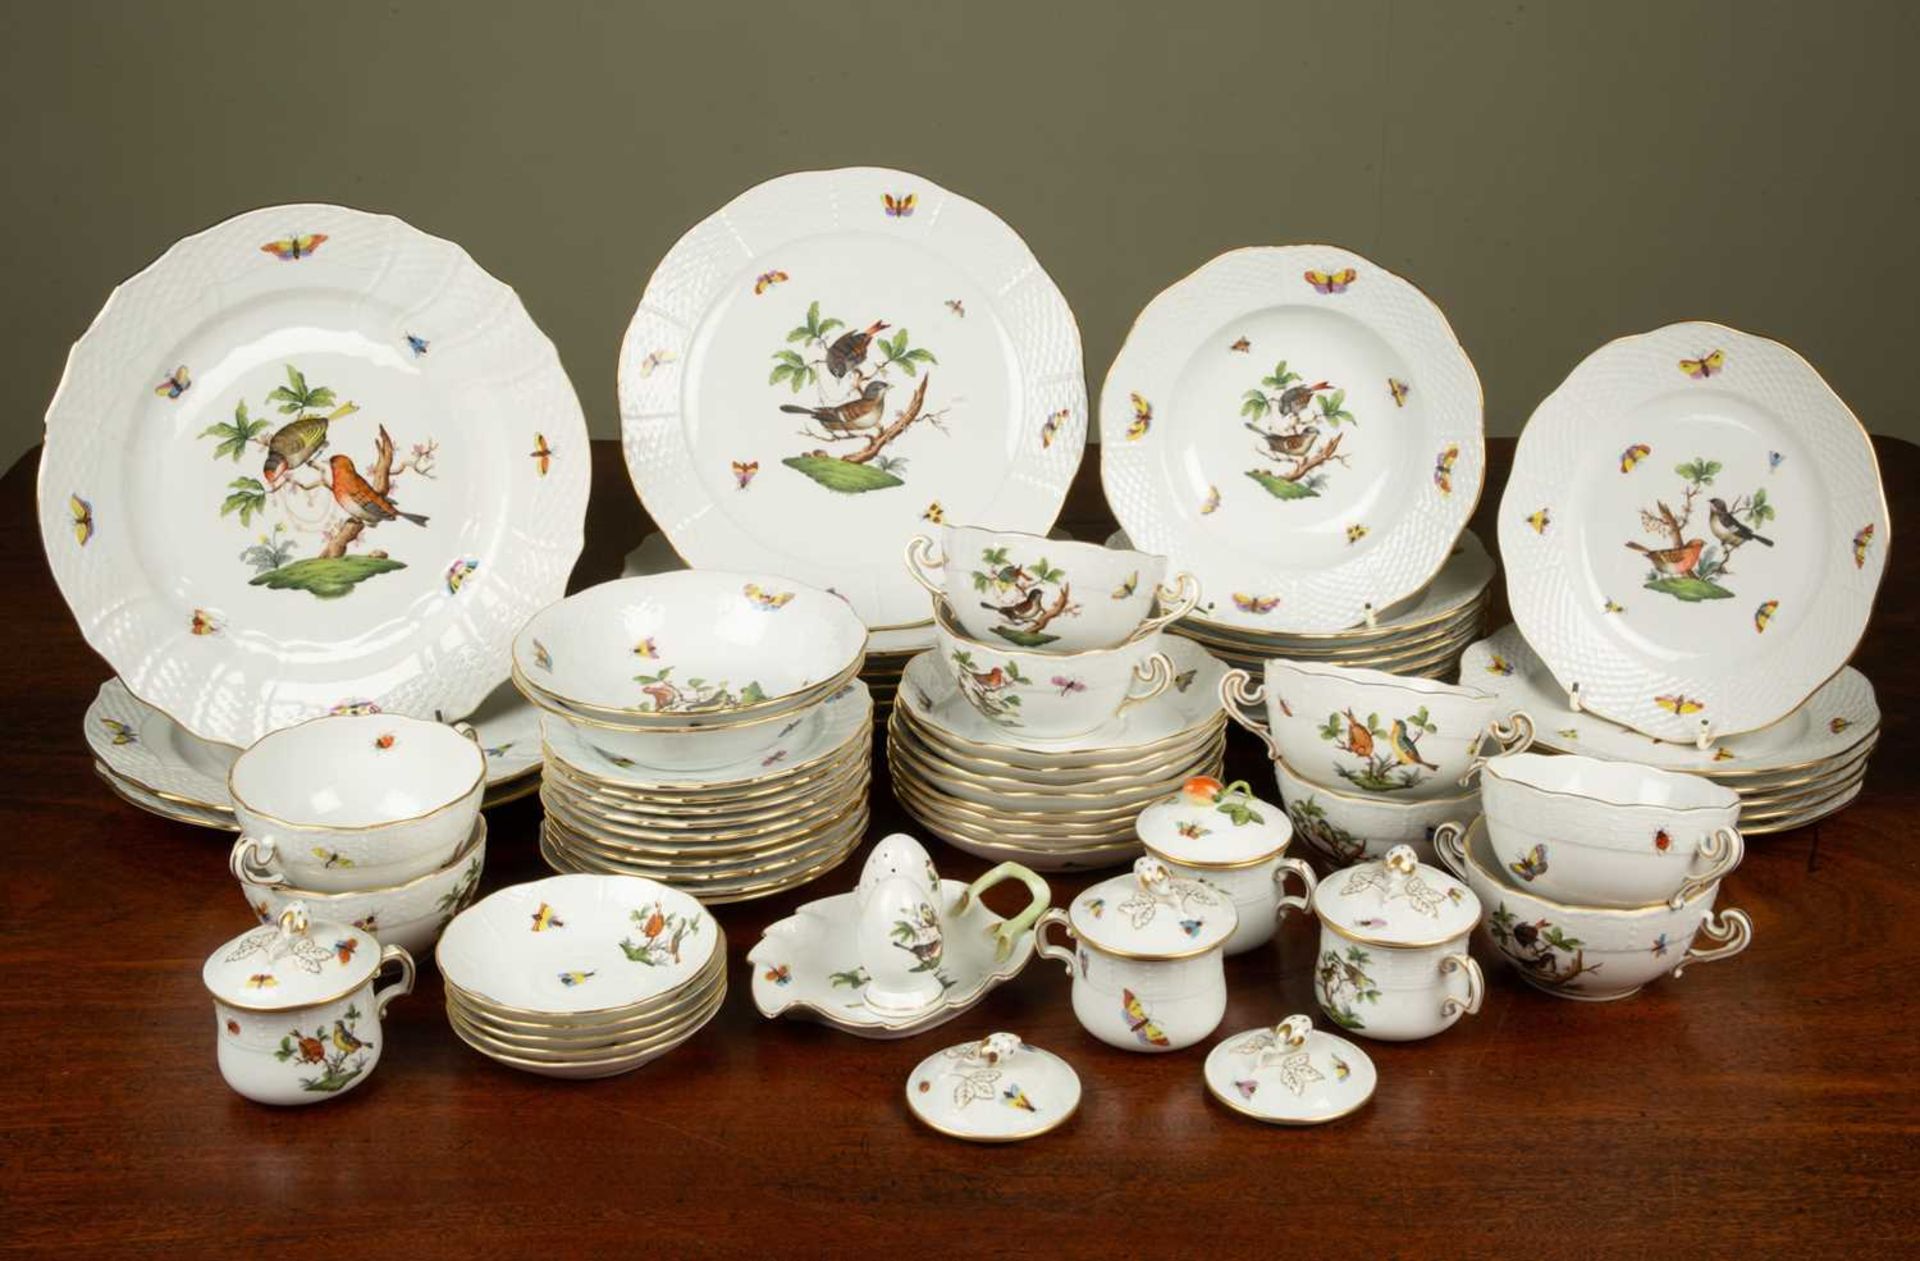 A Hungarian Herend porcelain part dinner service decorated with birds and butterflies and with a